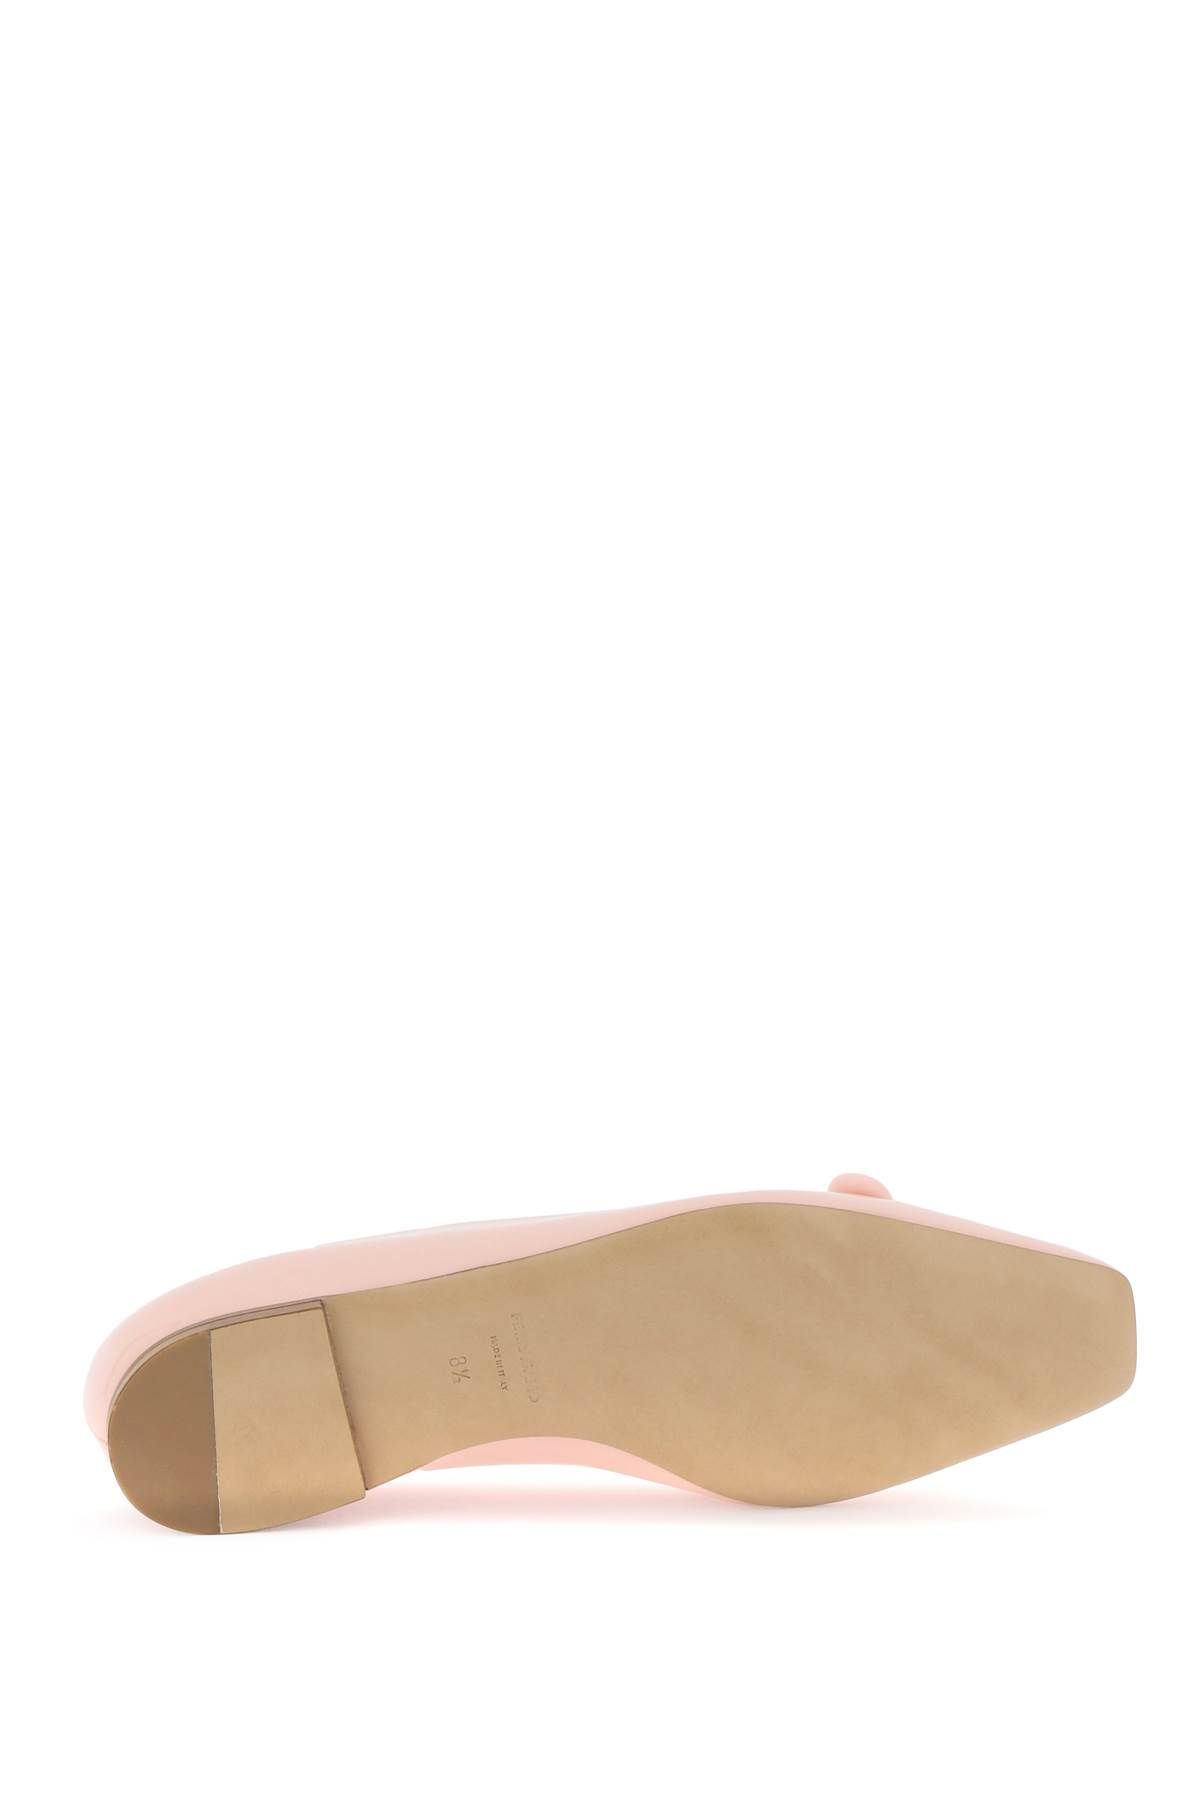 Shop Ferragamo Patent Leather Ballet Flats With Asymmetrical Bow In Pink